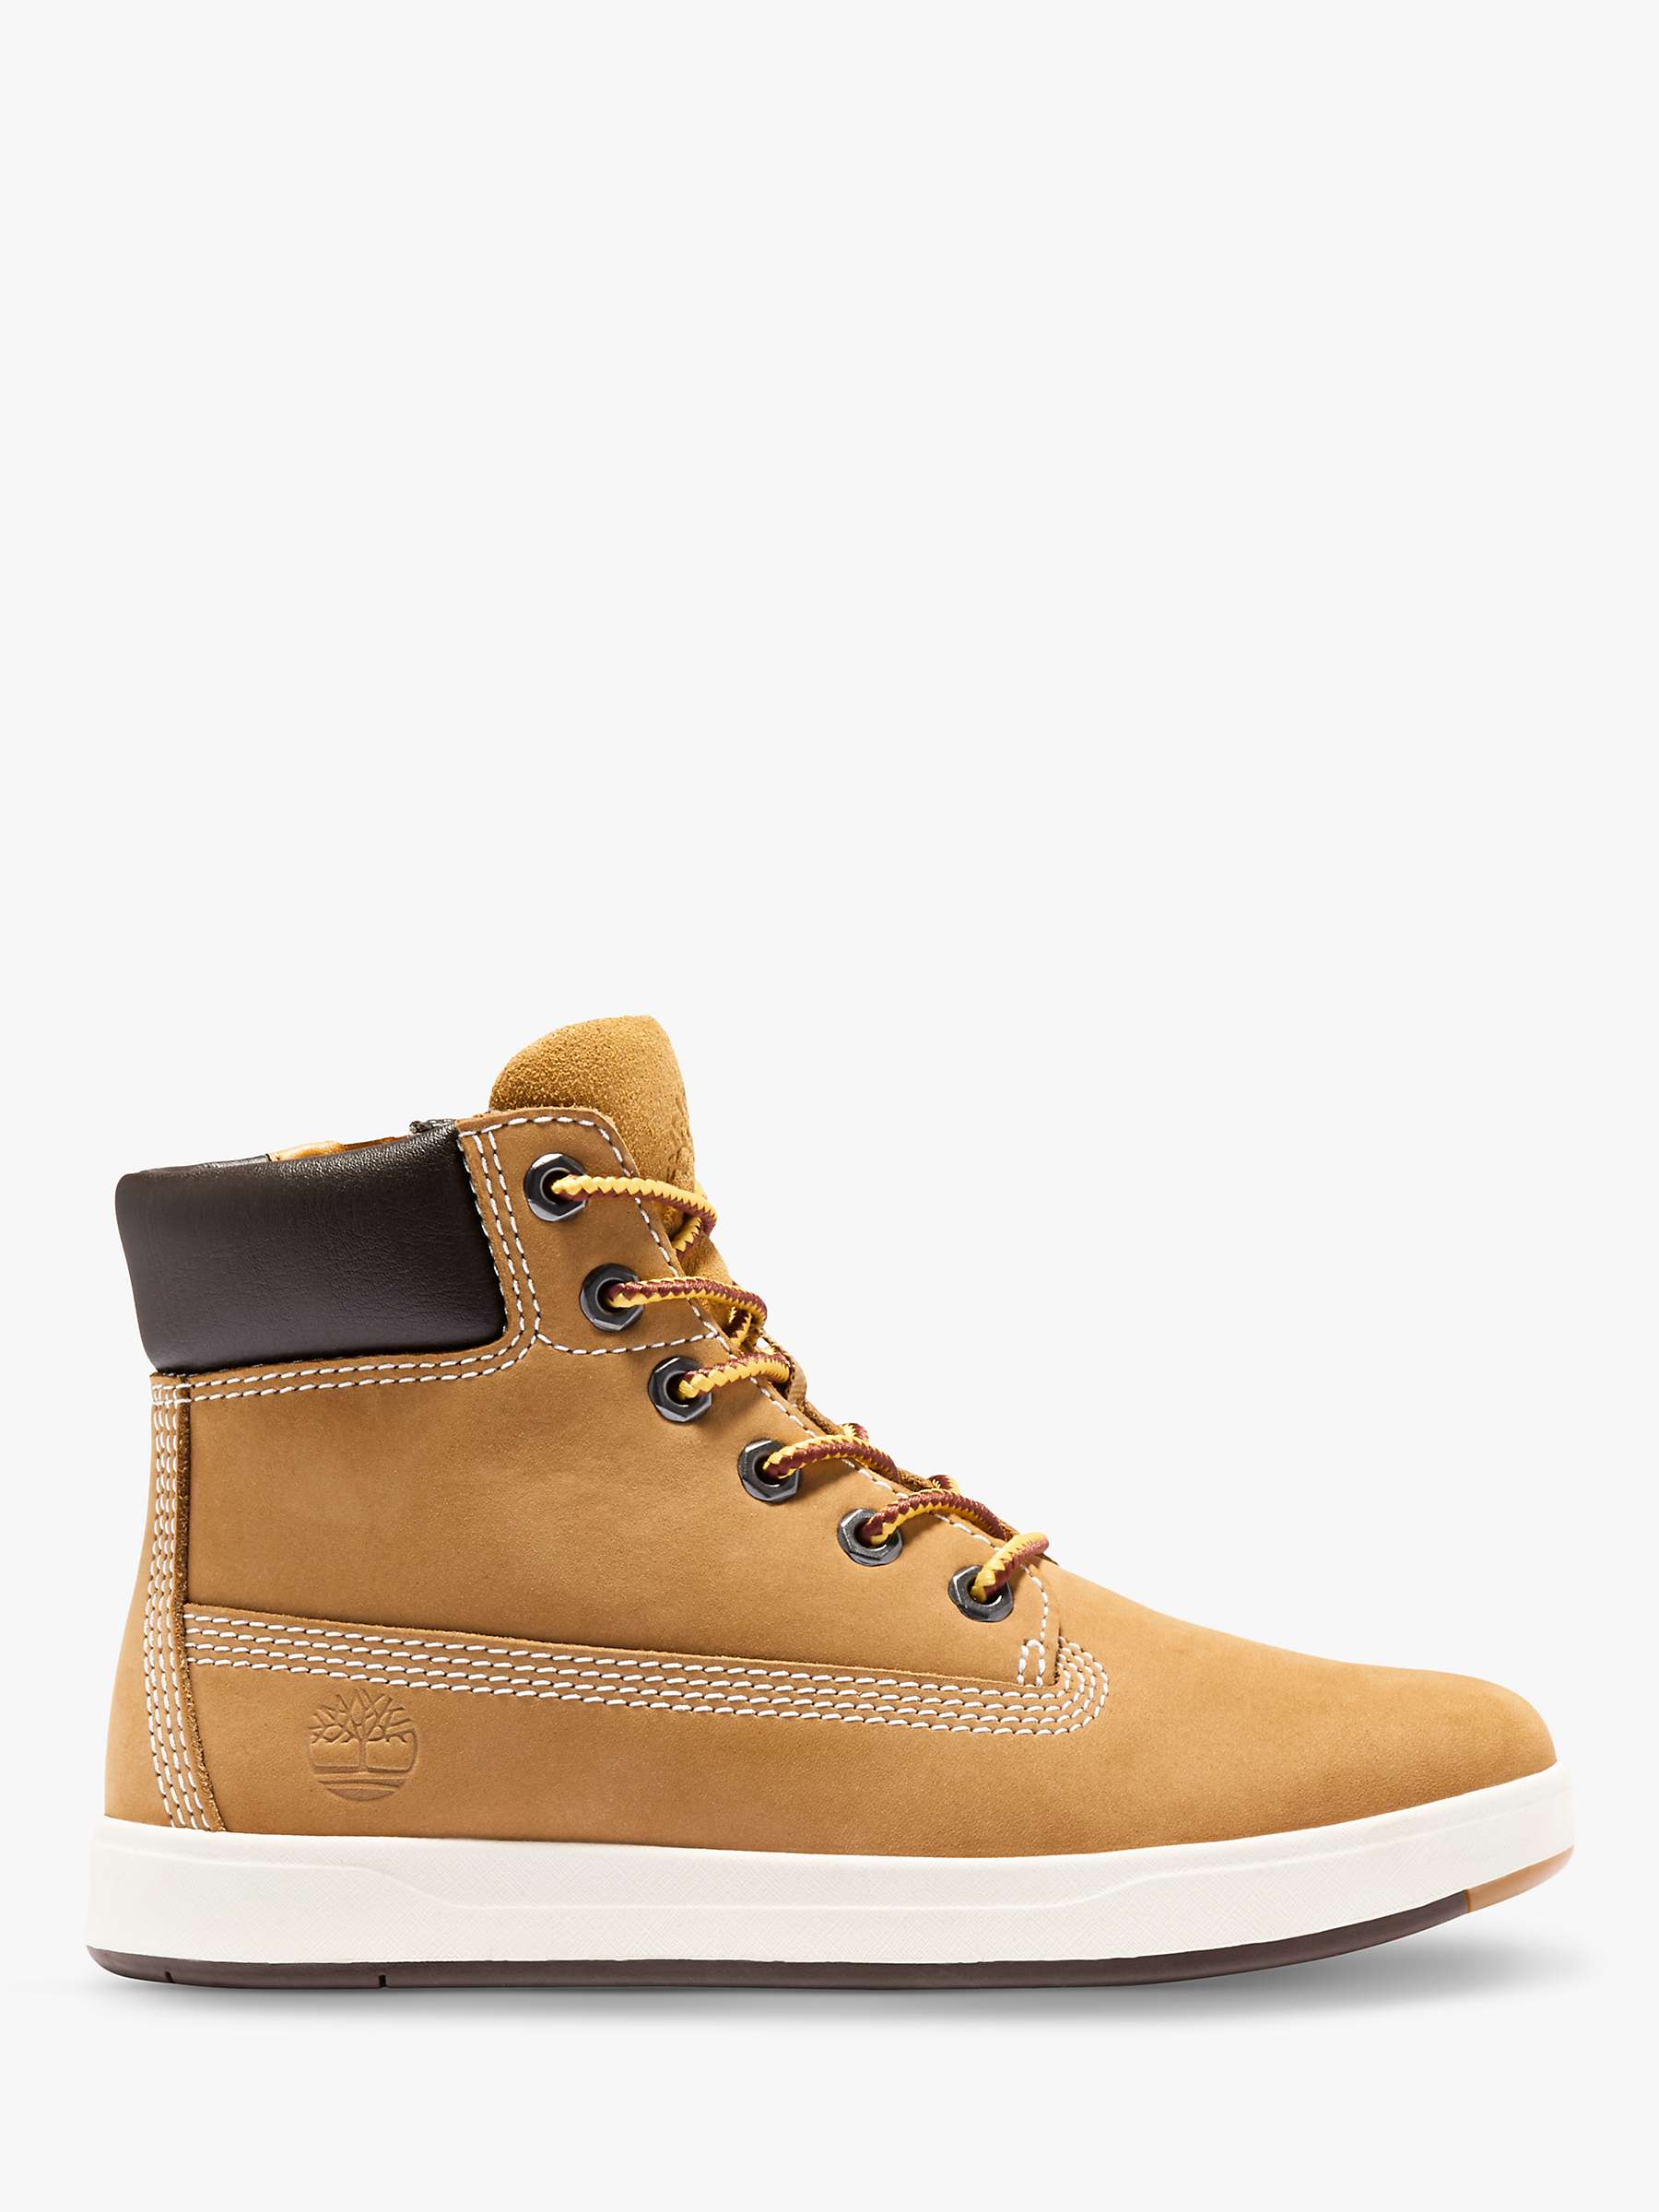 Timberland Children's Davis Square 6 Inch Boots, Wheat at John Lewis ...